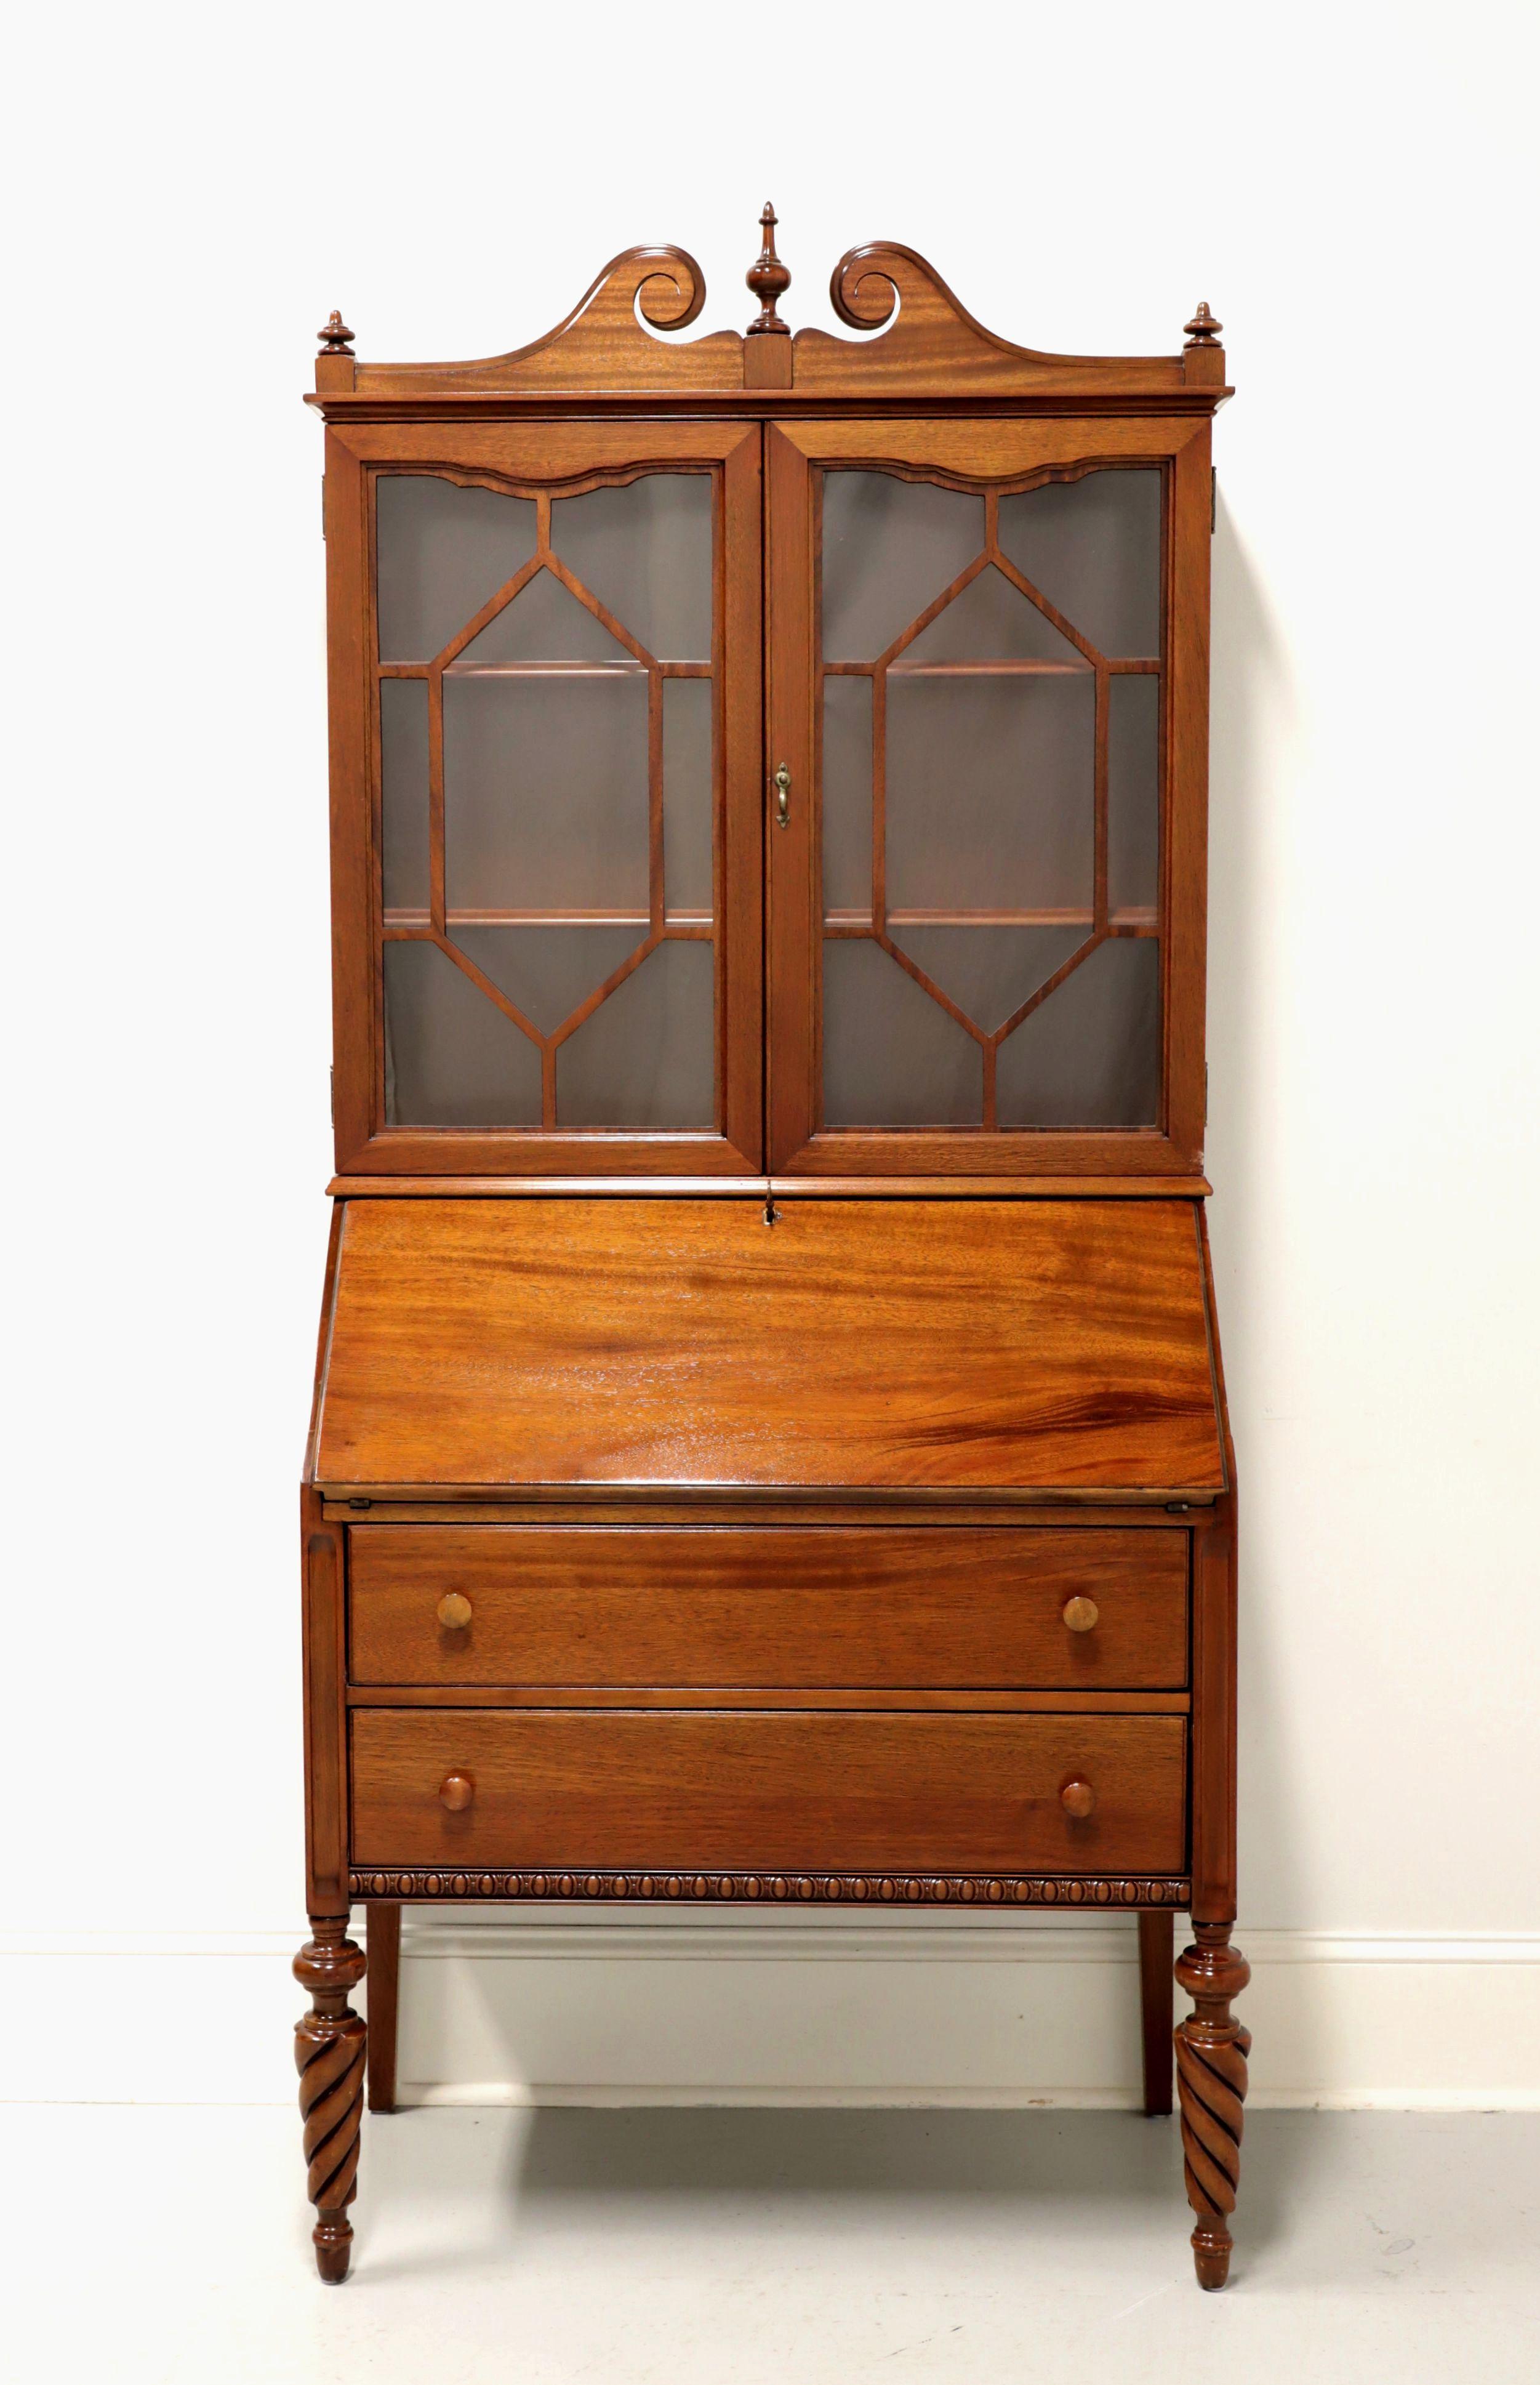 A Georgian style secretary desk by H.E. Shaw Furniture. Mahogany with brass hardware, wood drawer knobs, scroll pediment top with three finials, an elevated case, decorative cockbeading at apron and tapered twist front legs. Upper bookcase has two